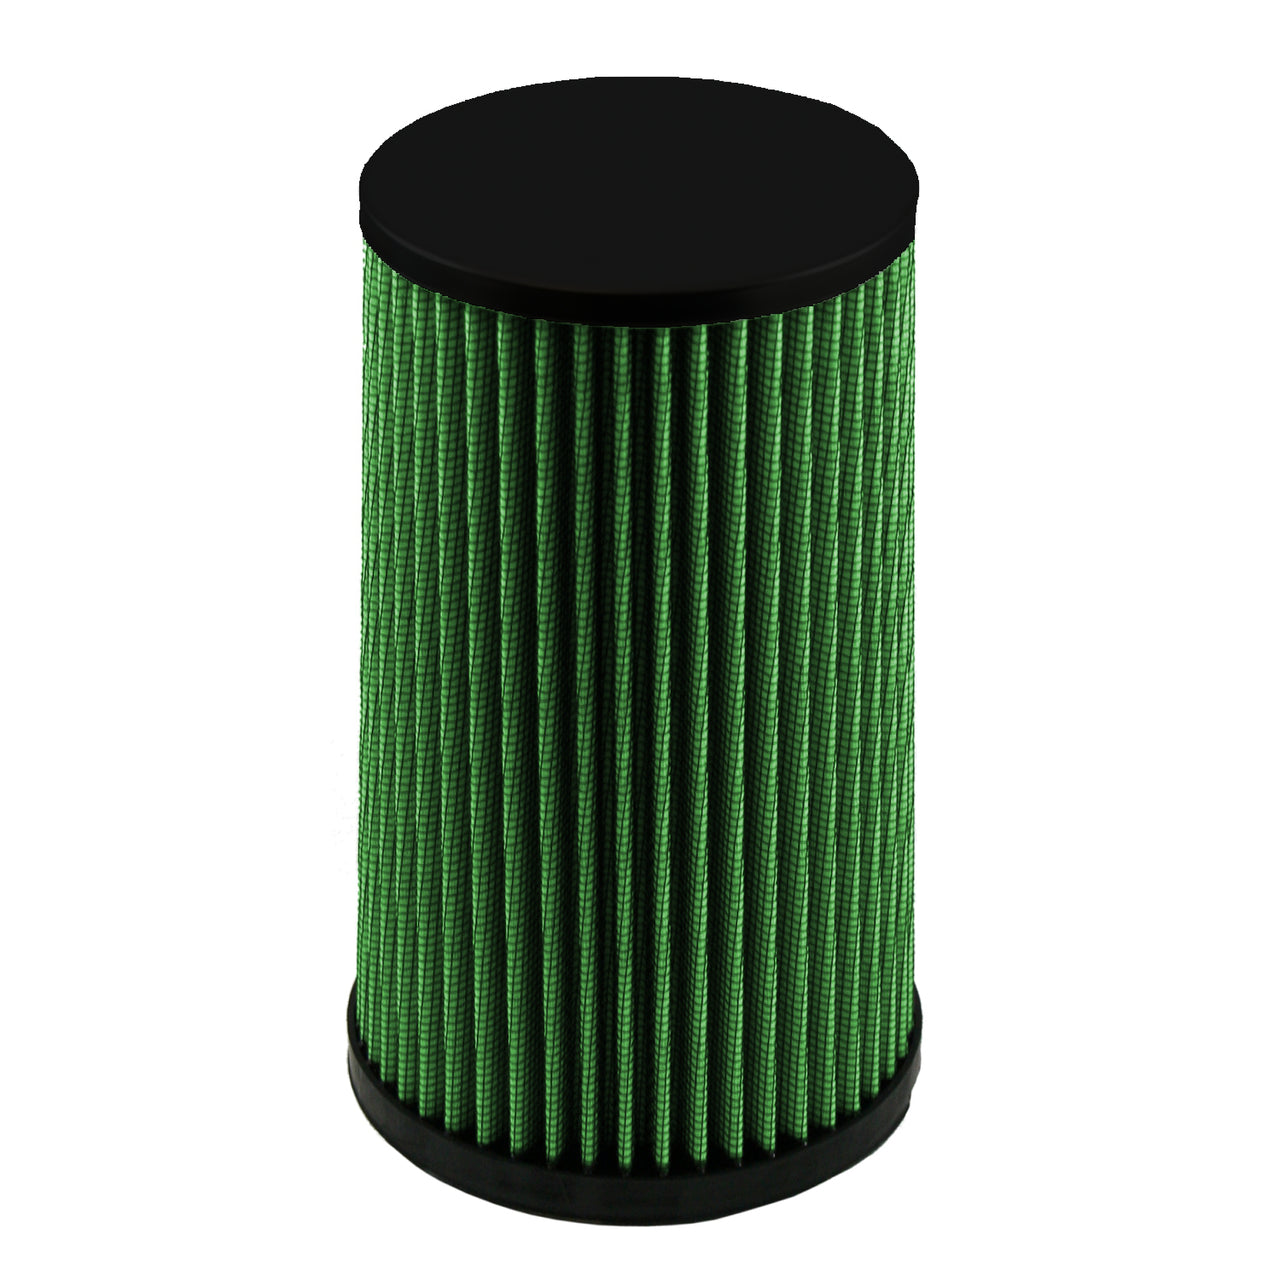 Green Filter Cone Filter - ID 3in. / Base 5.5in. / Top 4.75in. / H 9in.